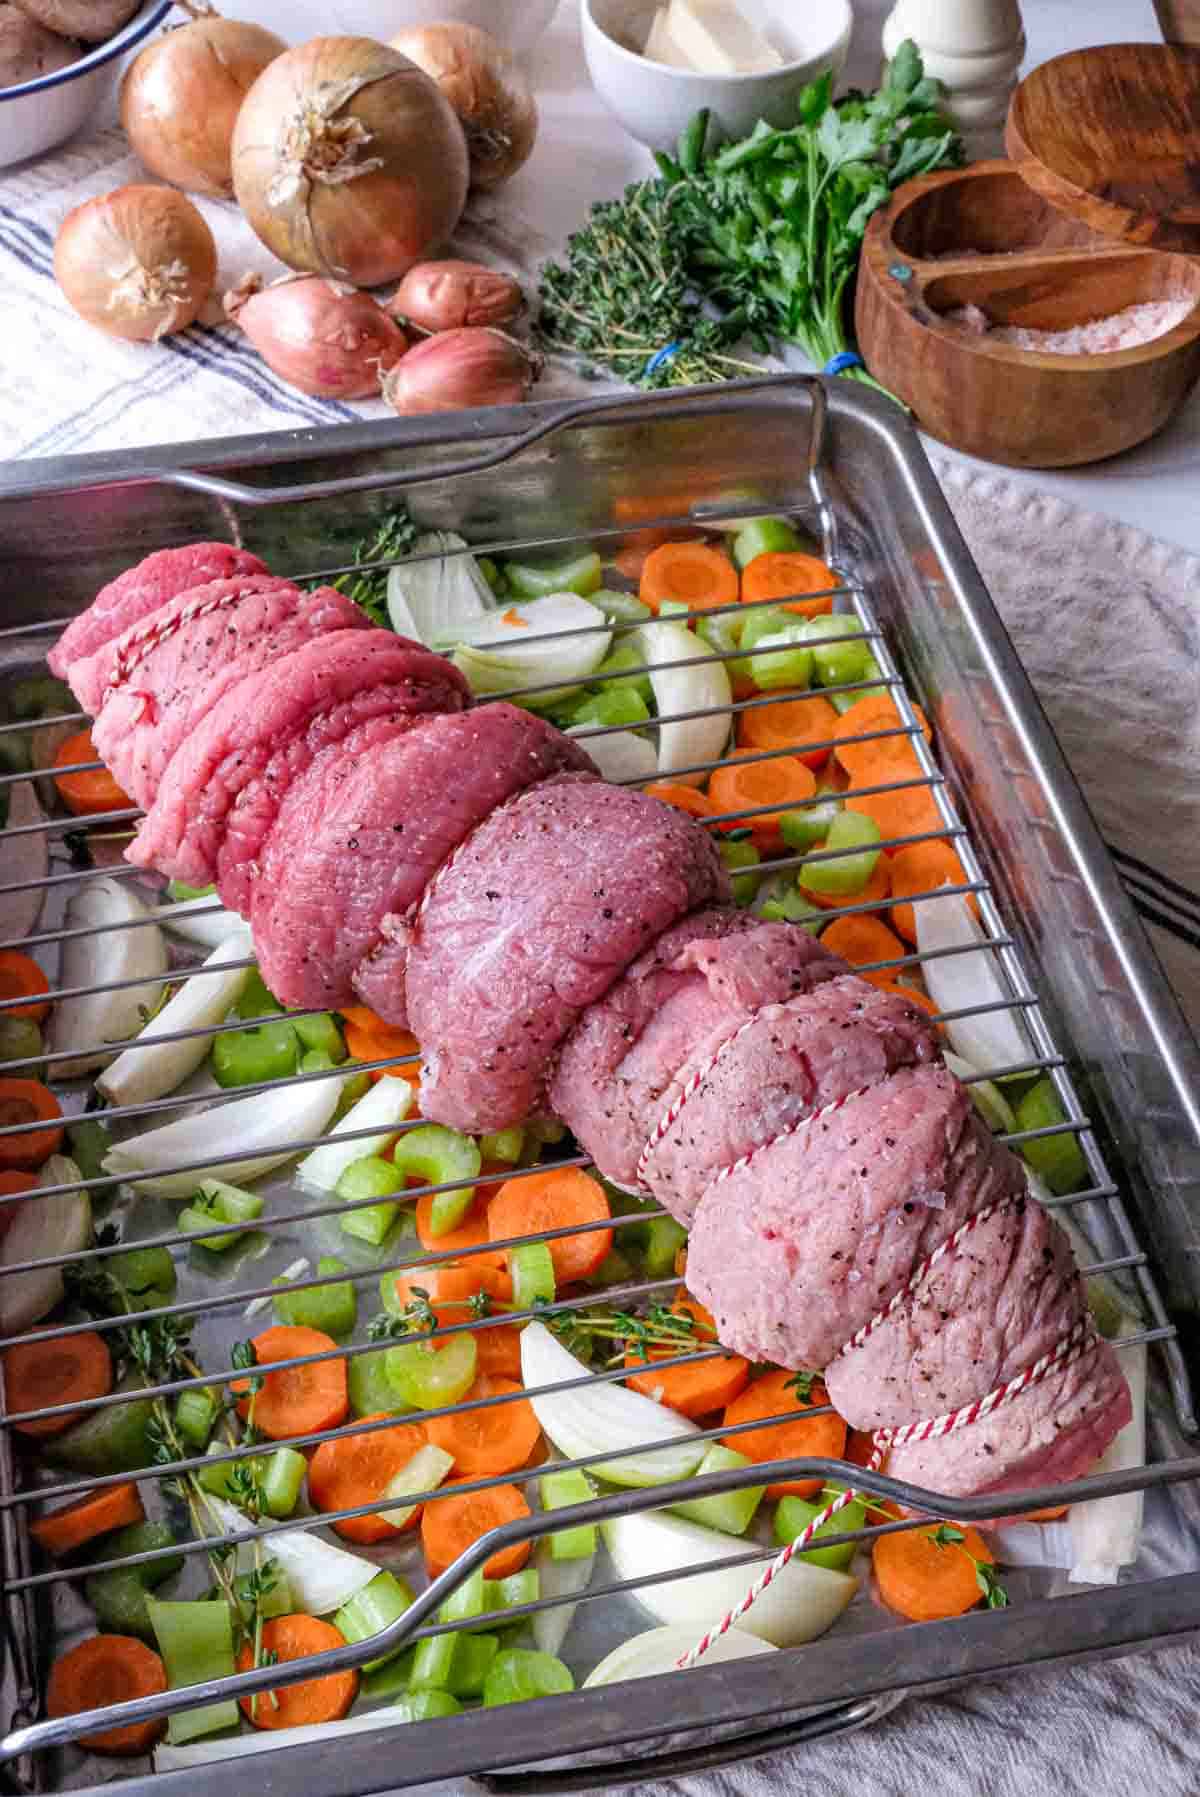 A trussed veal laying on top of a rack in a roasting pan with carrots, celery, onions and fresh thyme.